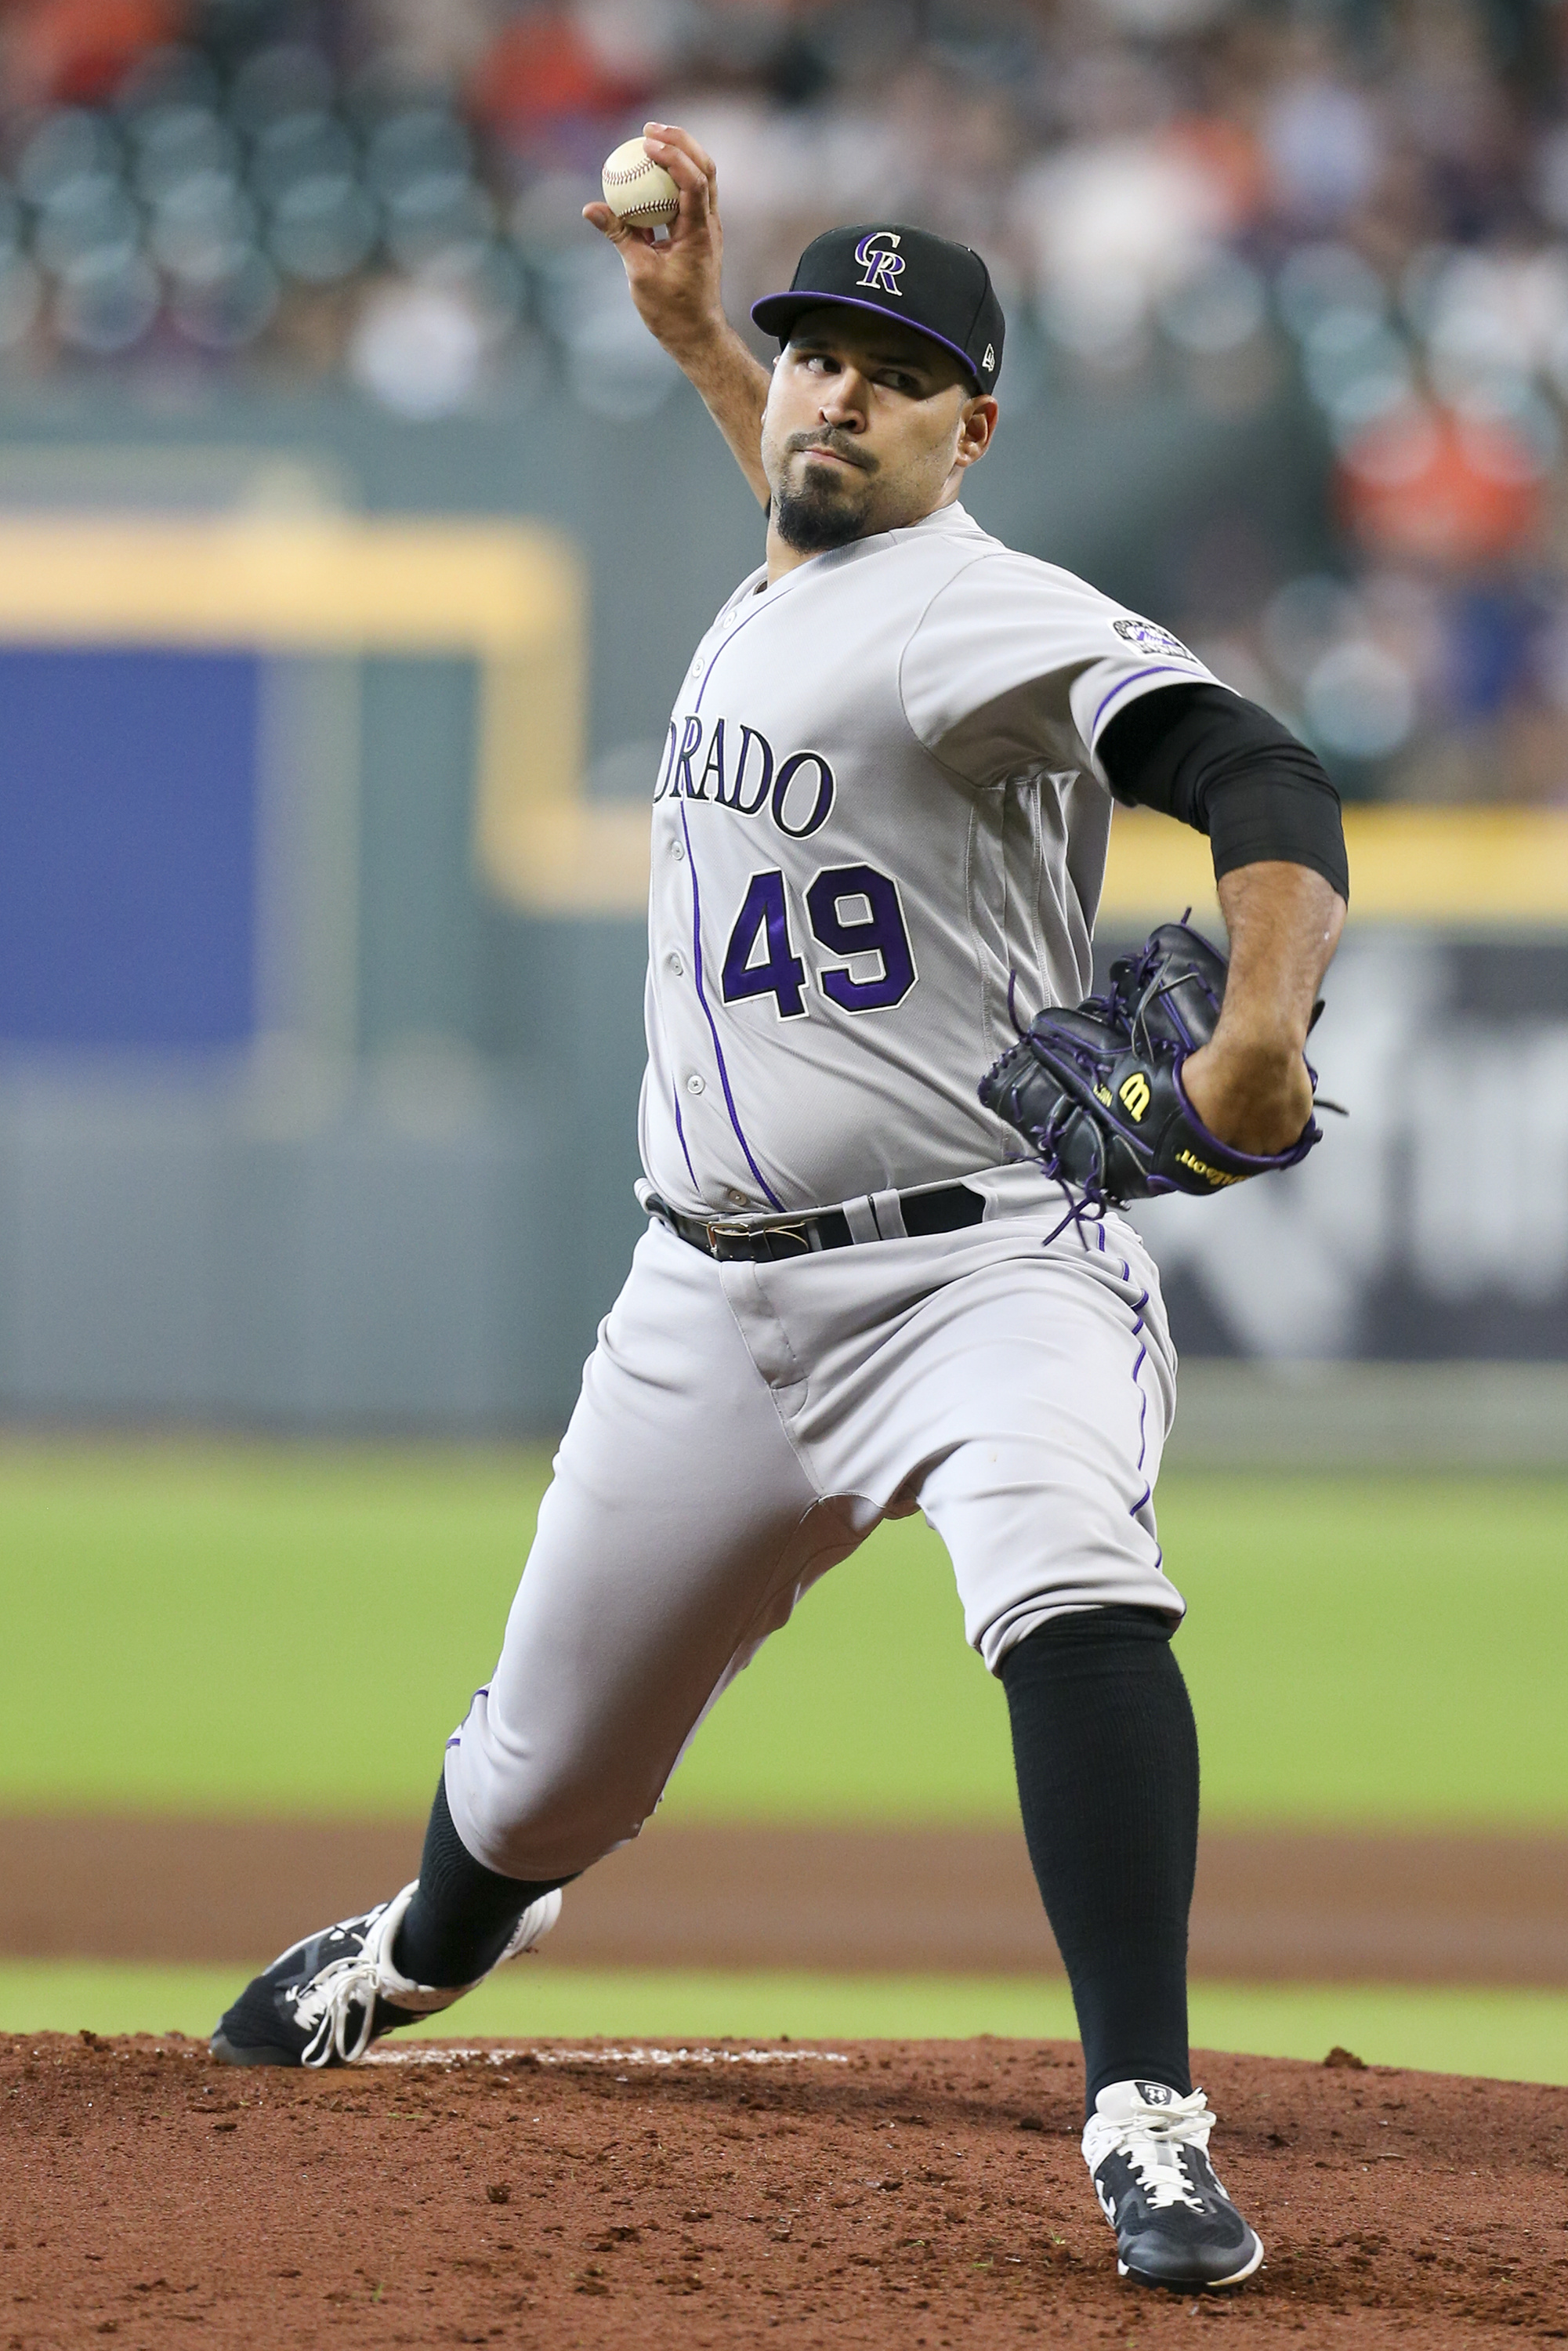 Why are the Rockies still bad? How elevation affects baseball.